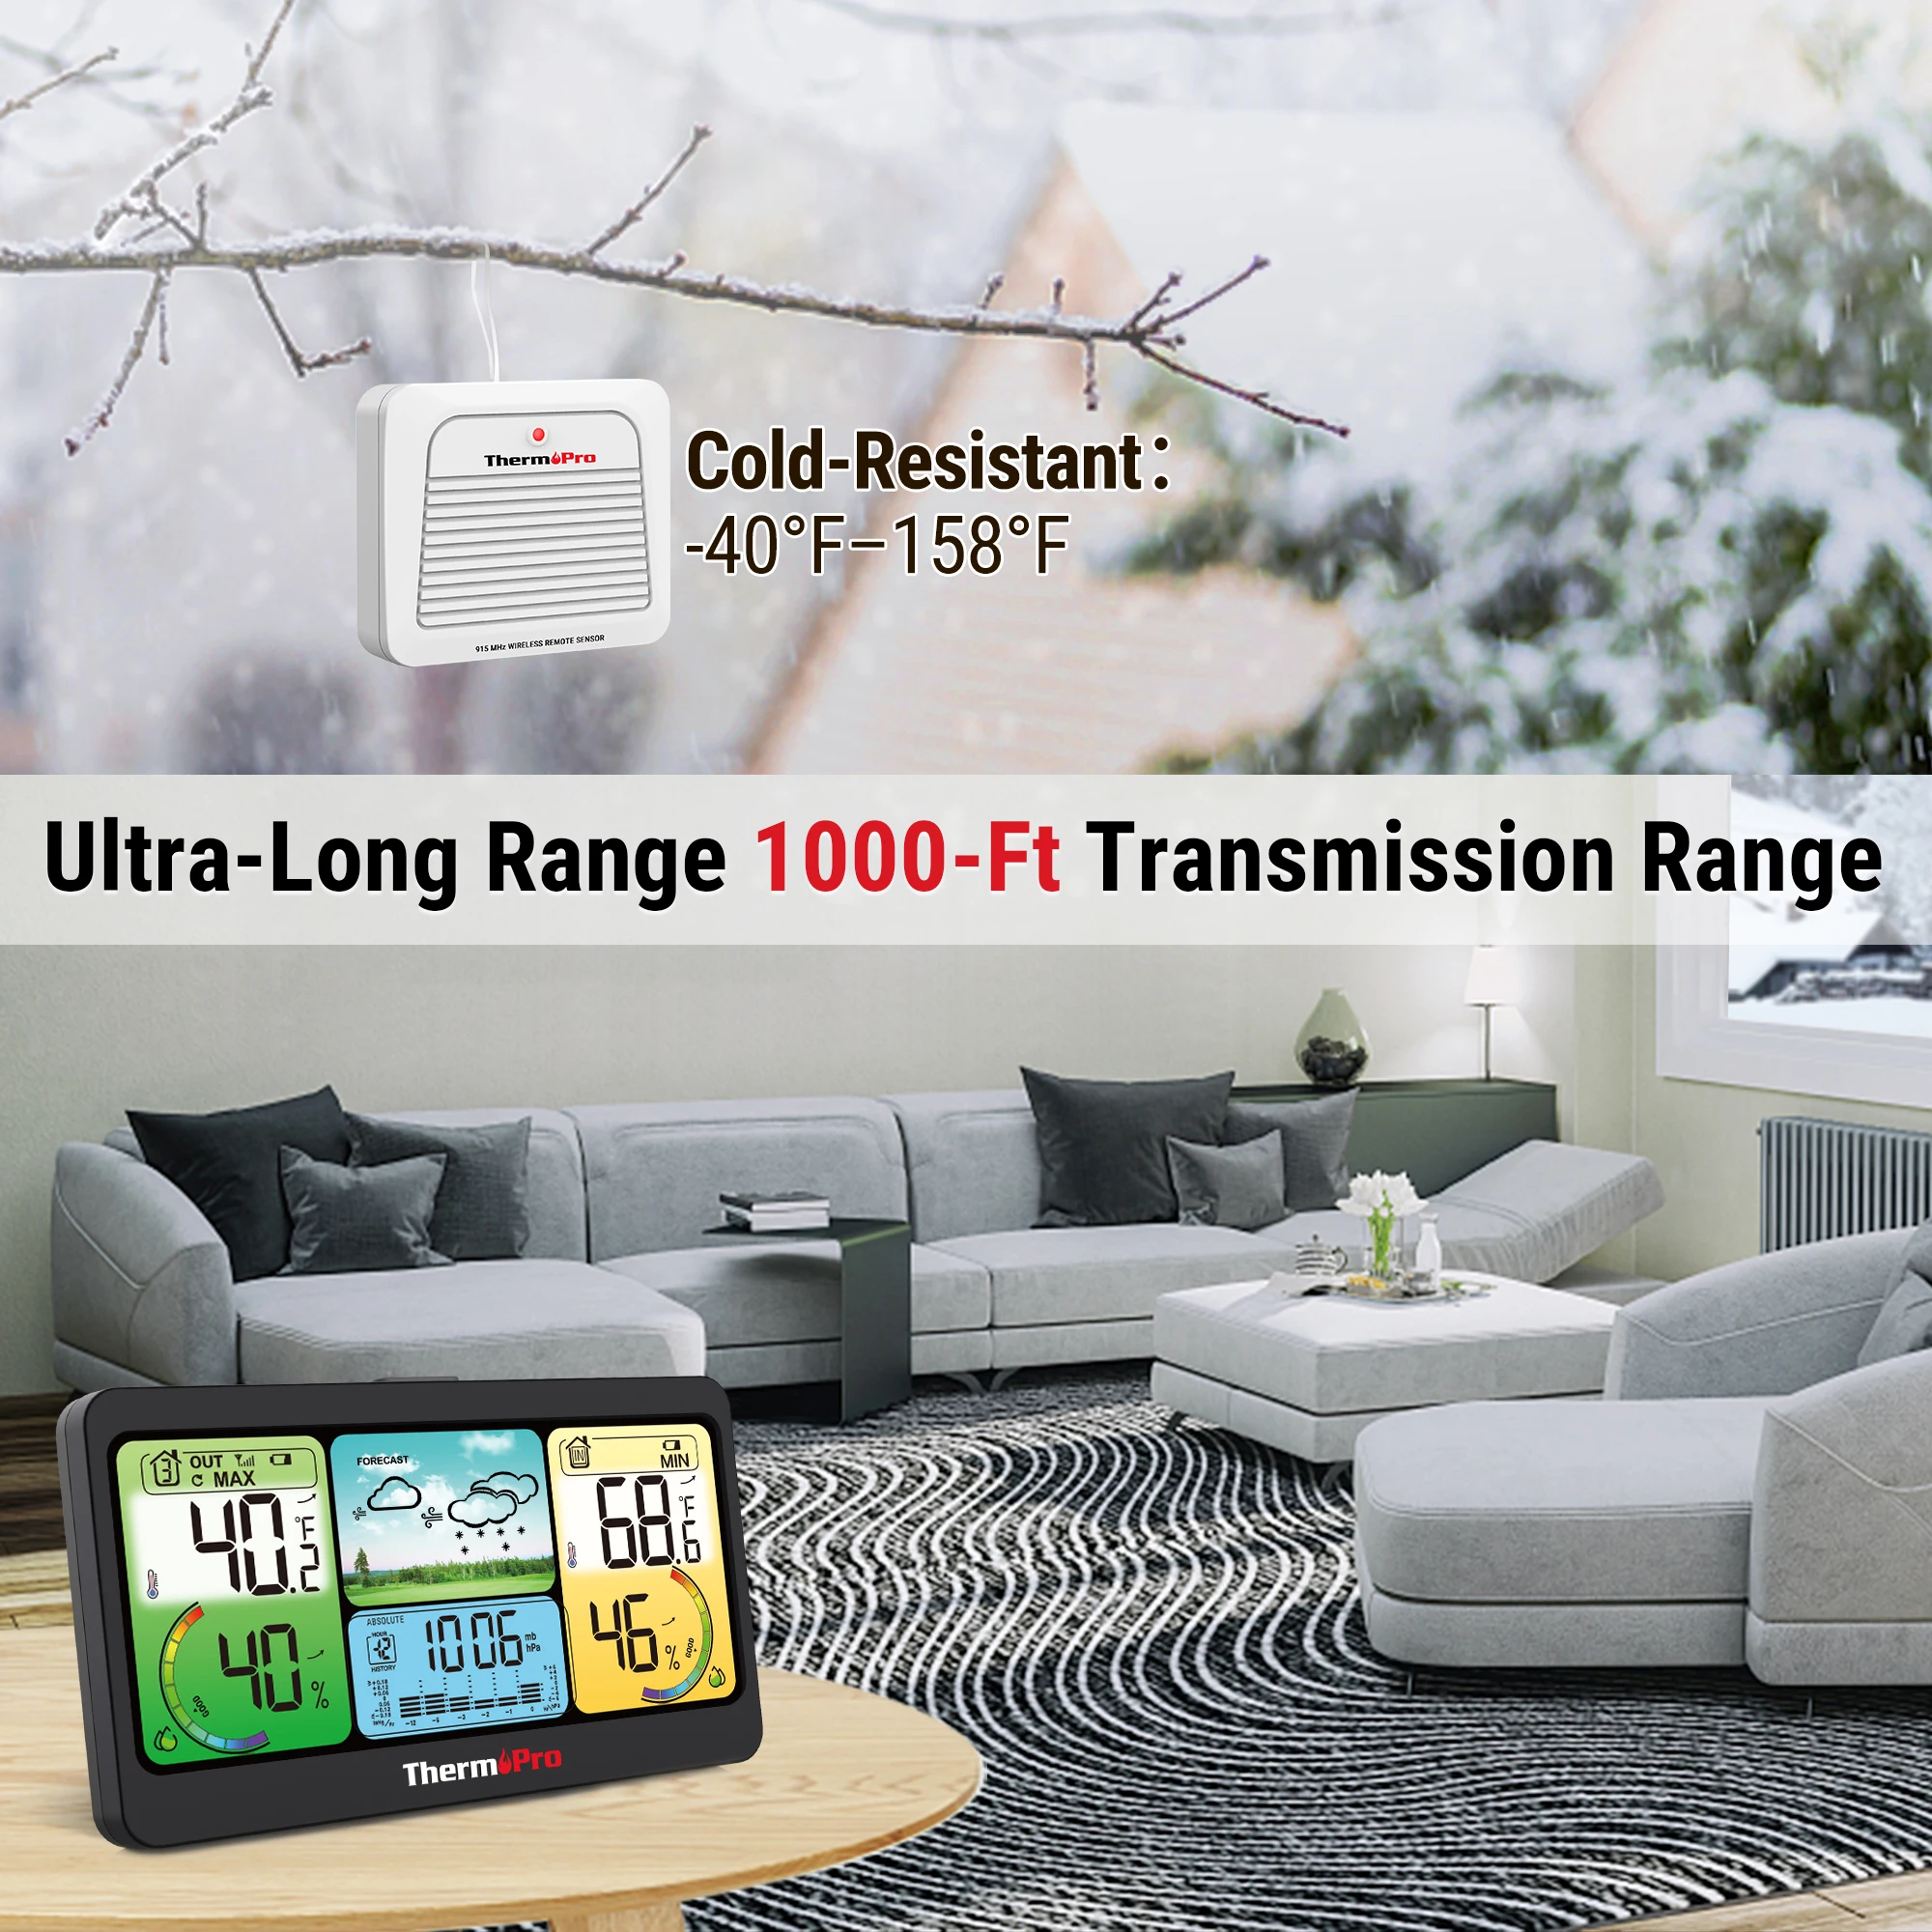 https://ae01.alicdn.com/kf/A567b505403d049029109ae06cbbb745dX/ThermoPro-TP280C-300M-Wireless-Weather-Station-Chargeable-Room-Thermomether-Hygrometer-With-Weather-Forecast-Big-LCD-Display.jpg